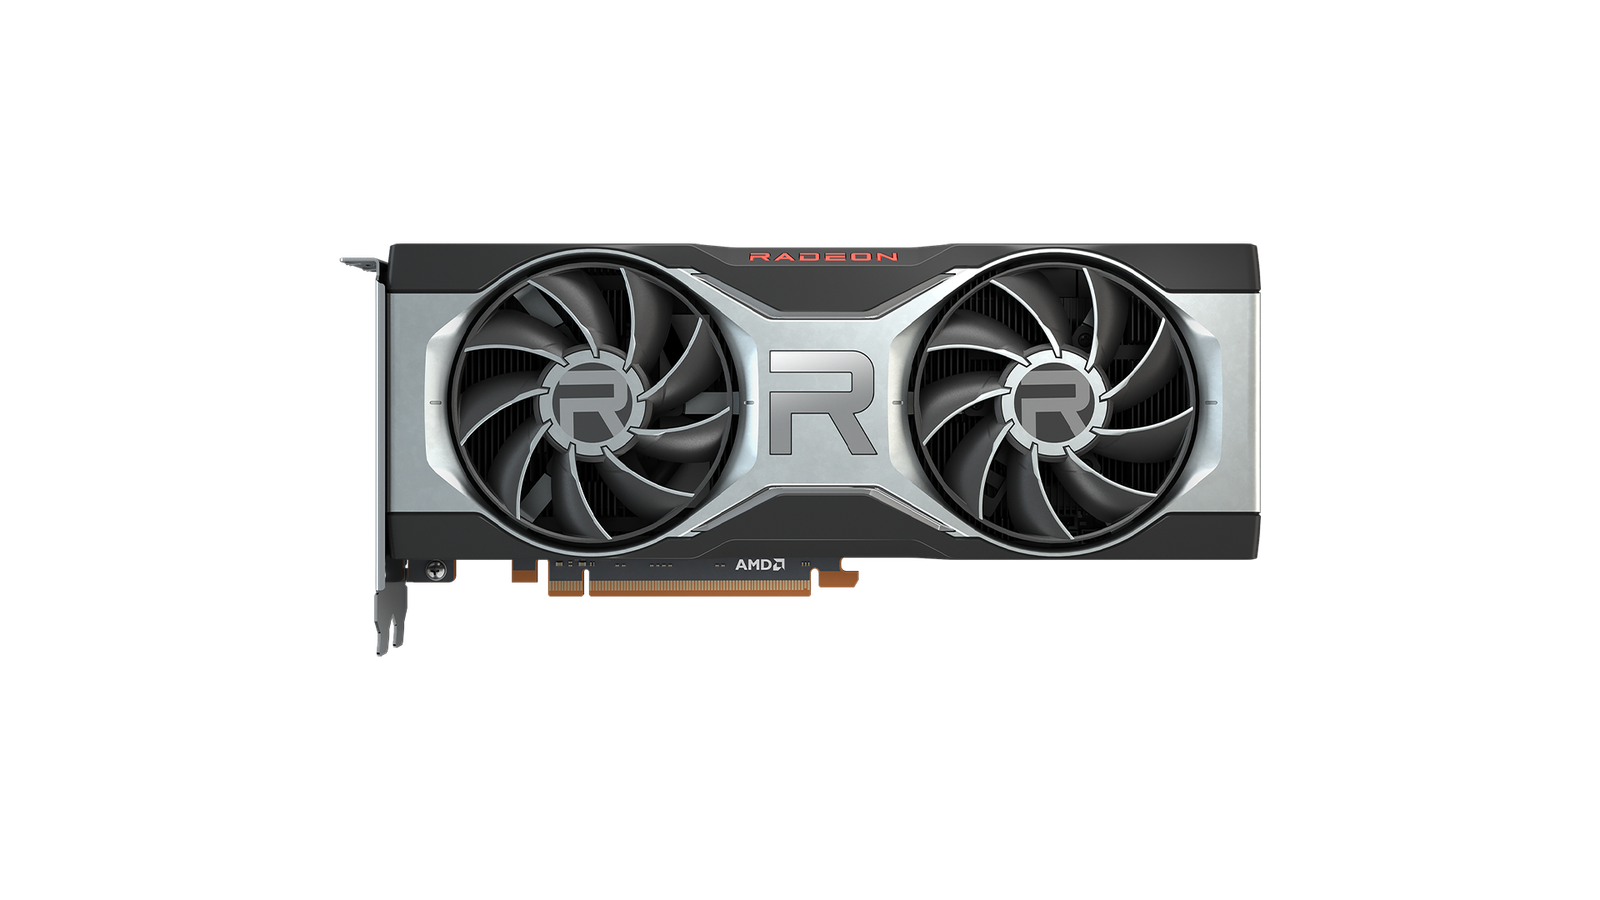 AMD Radeon RX 6700 XT - The best value-for-money graphics card for gaming